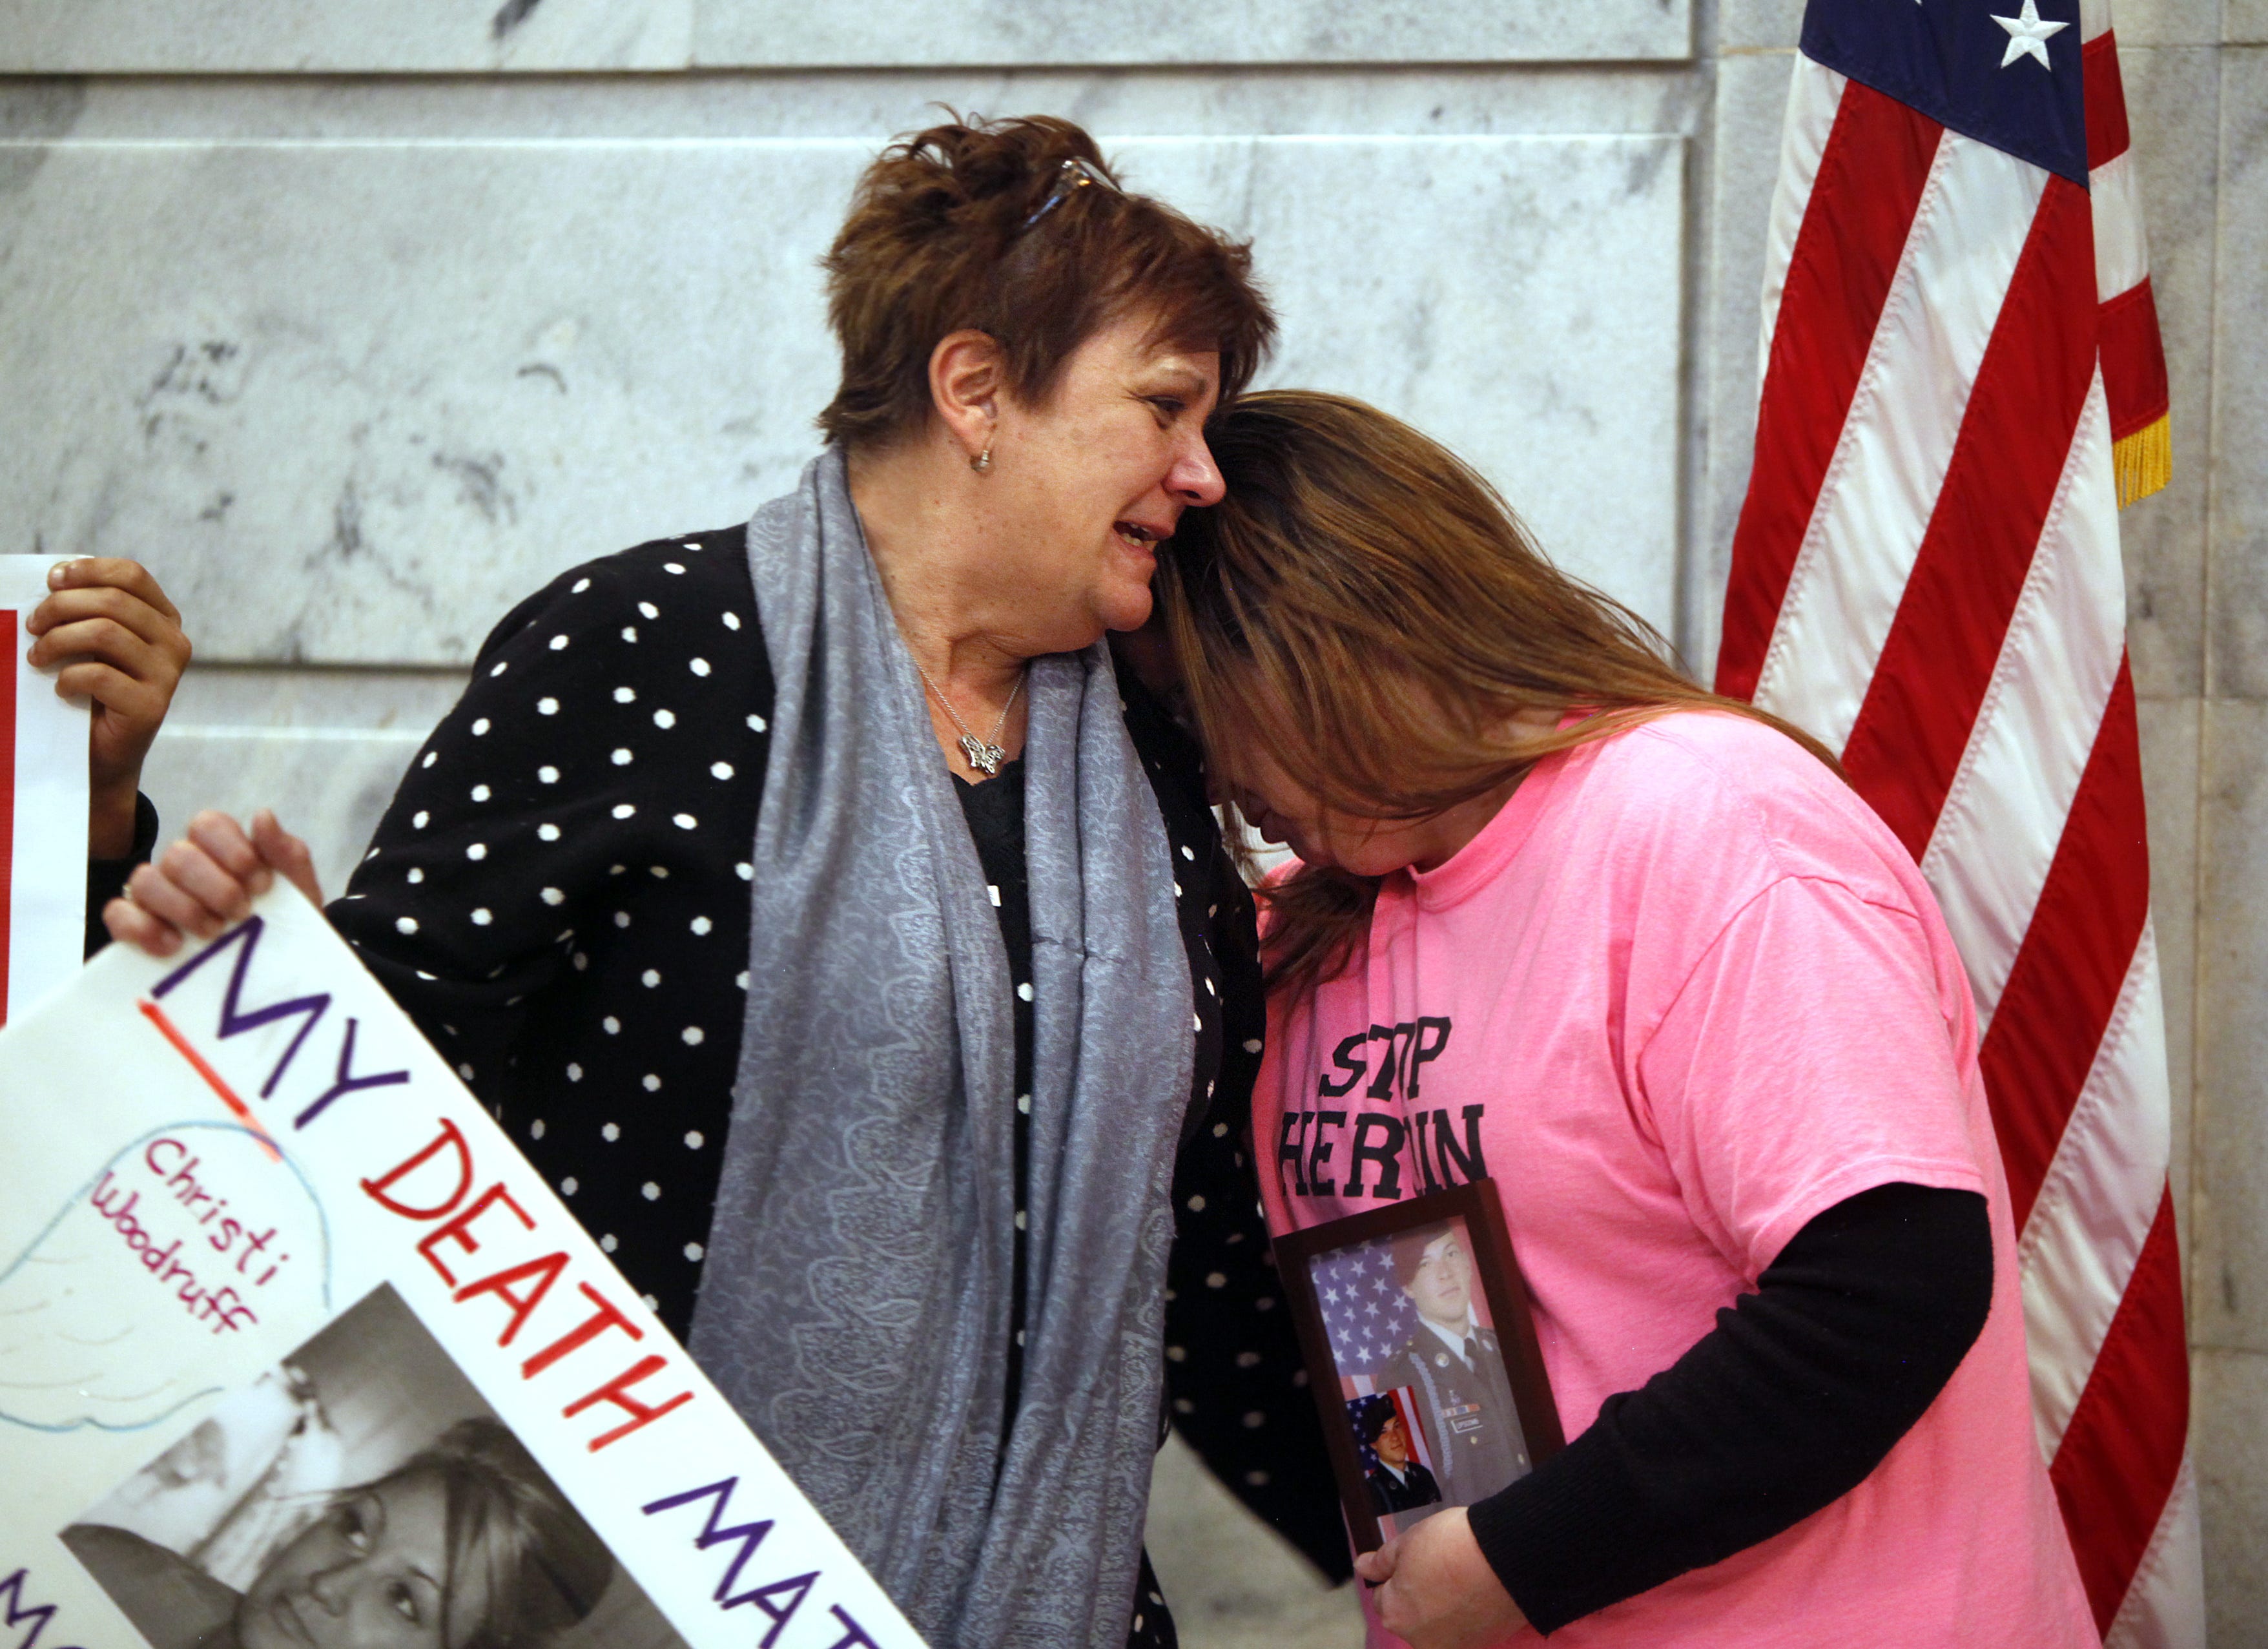 Jenni Woodruff (left), weeps as she clutches a poster with her daughter Christi's photograph. This was in Frankfort, Kentucky, where she was trying to convince legislators to approve needle exchange.